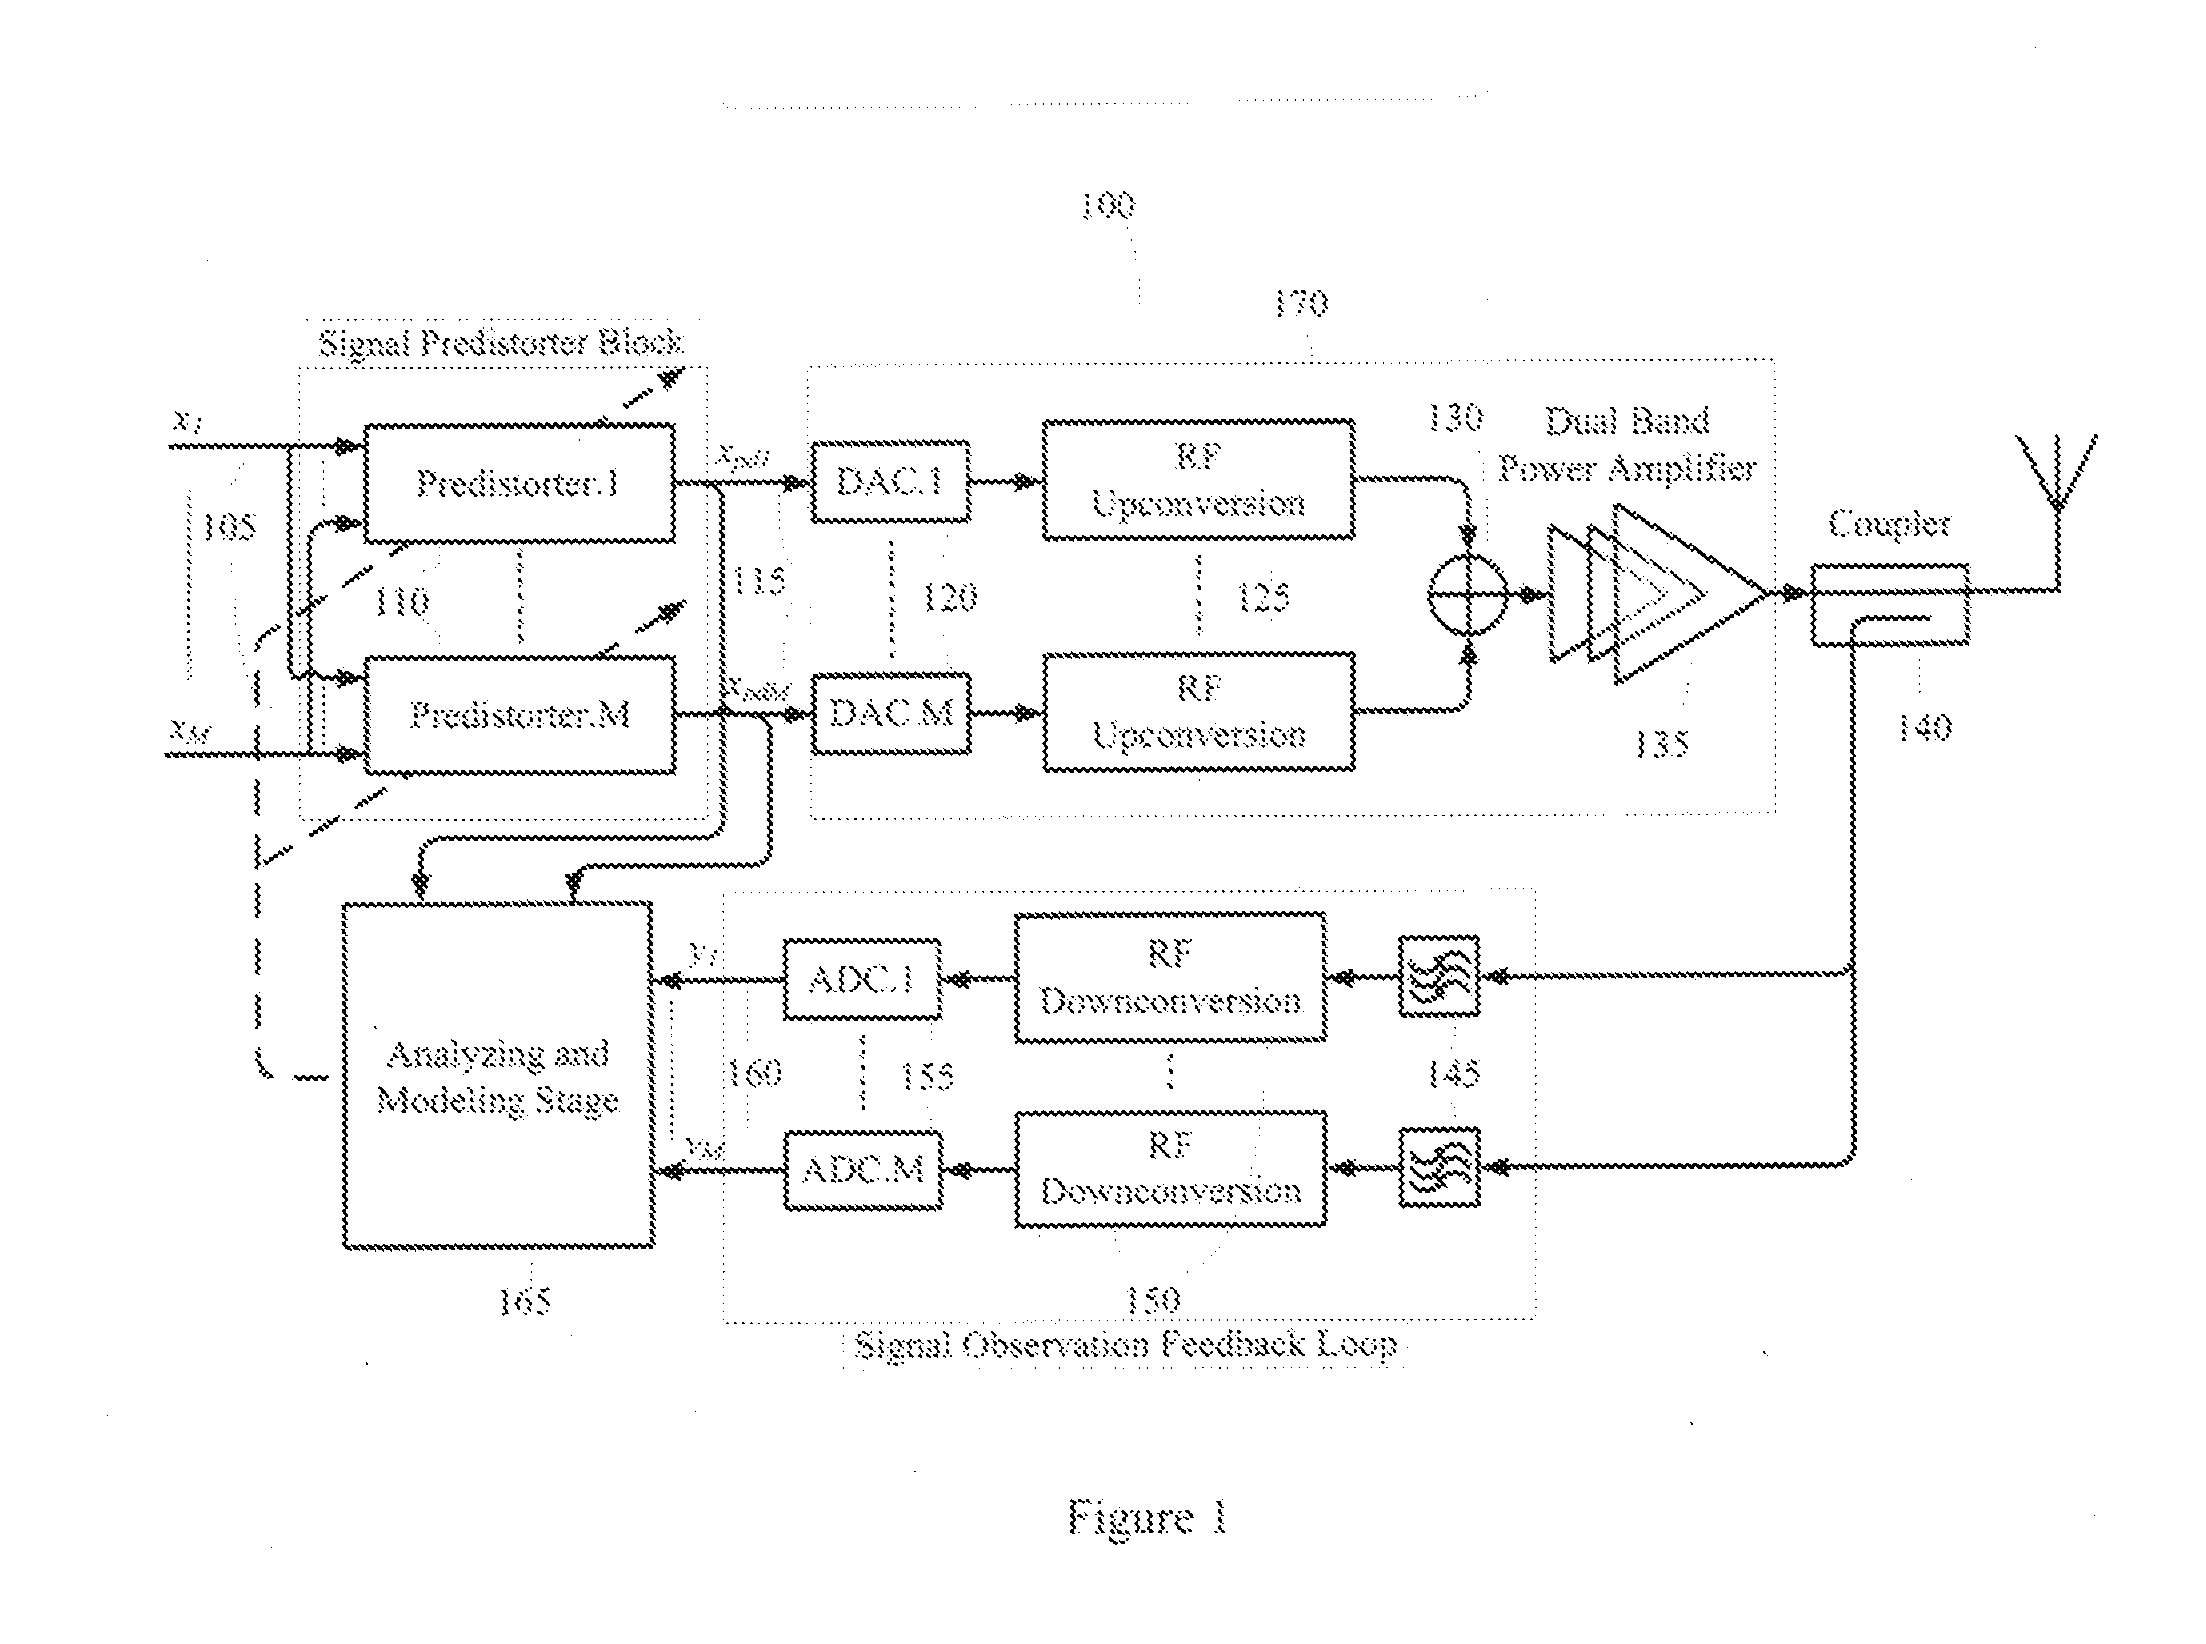 Digital Multi-band Predistortion Linearizer with Nonlinear Subsampling Algorithm in the Feedback Loop